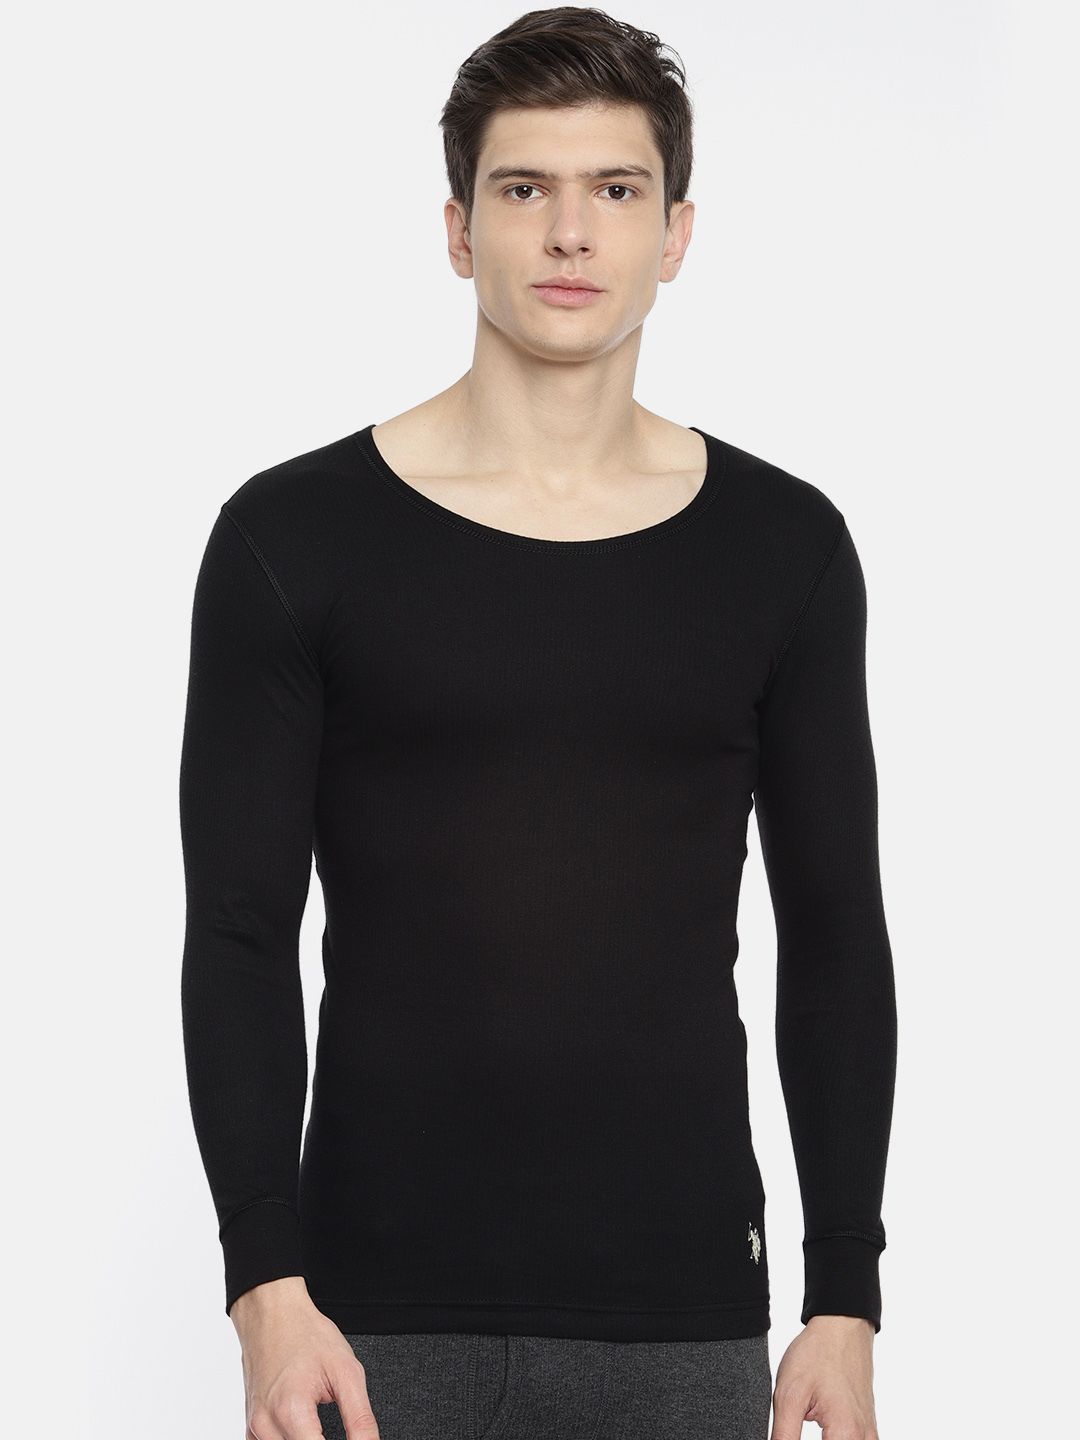 U.S. Polo Assn. Men Black Solid Round Neck Knitted Thermal T-shirt I652-002-PL-L Price in India